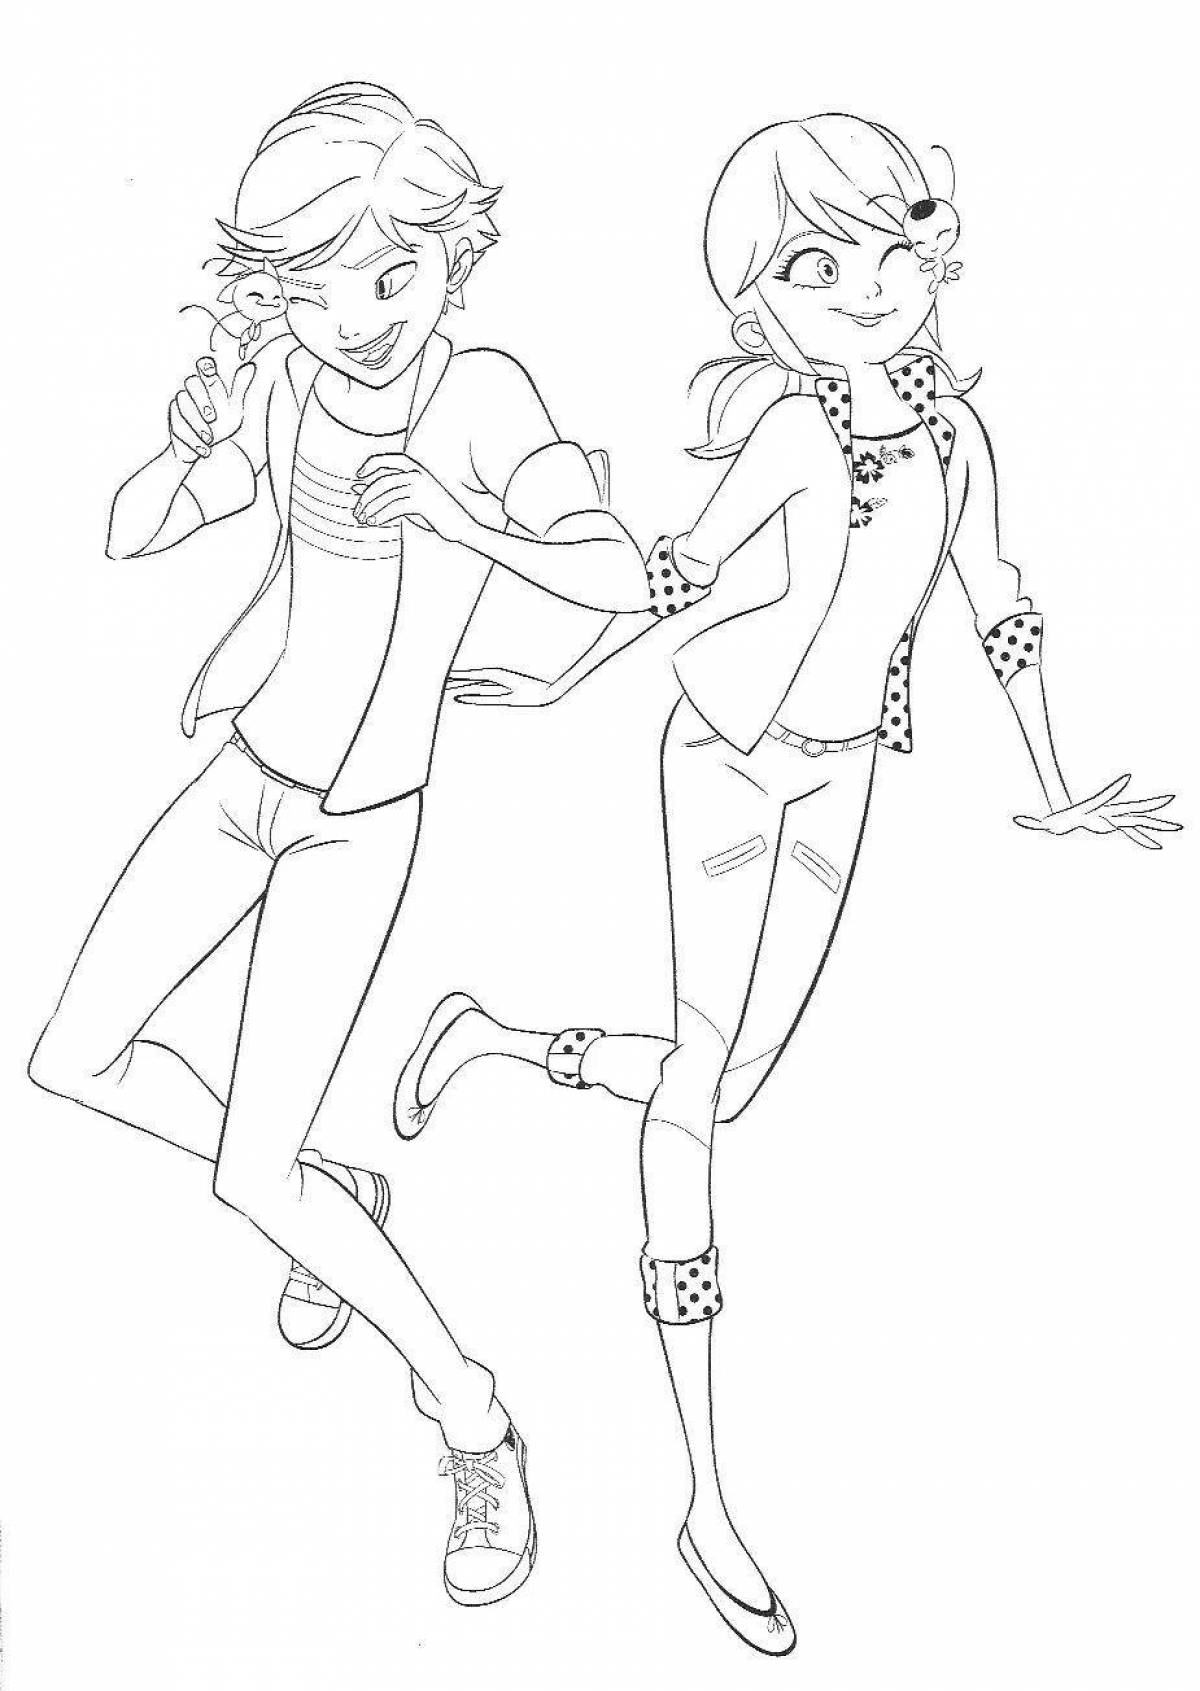 Glowing marinette and adrian coloring page